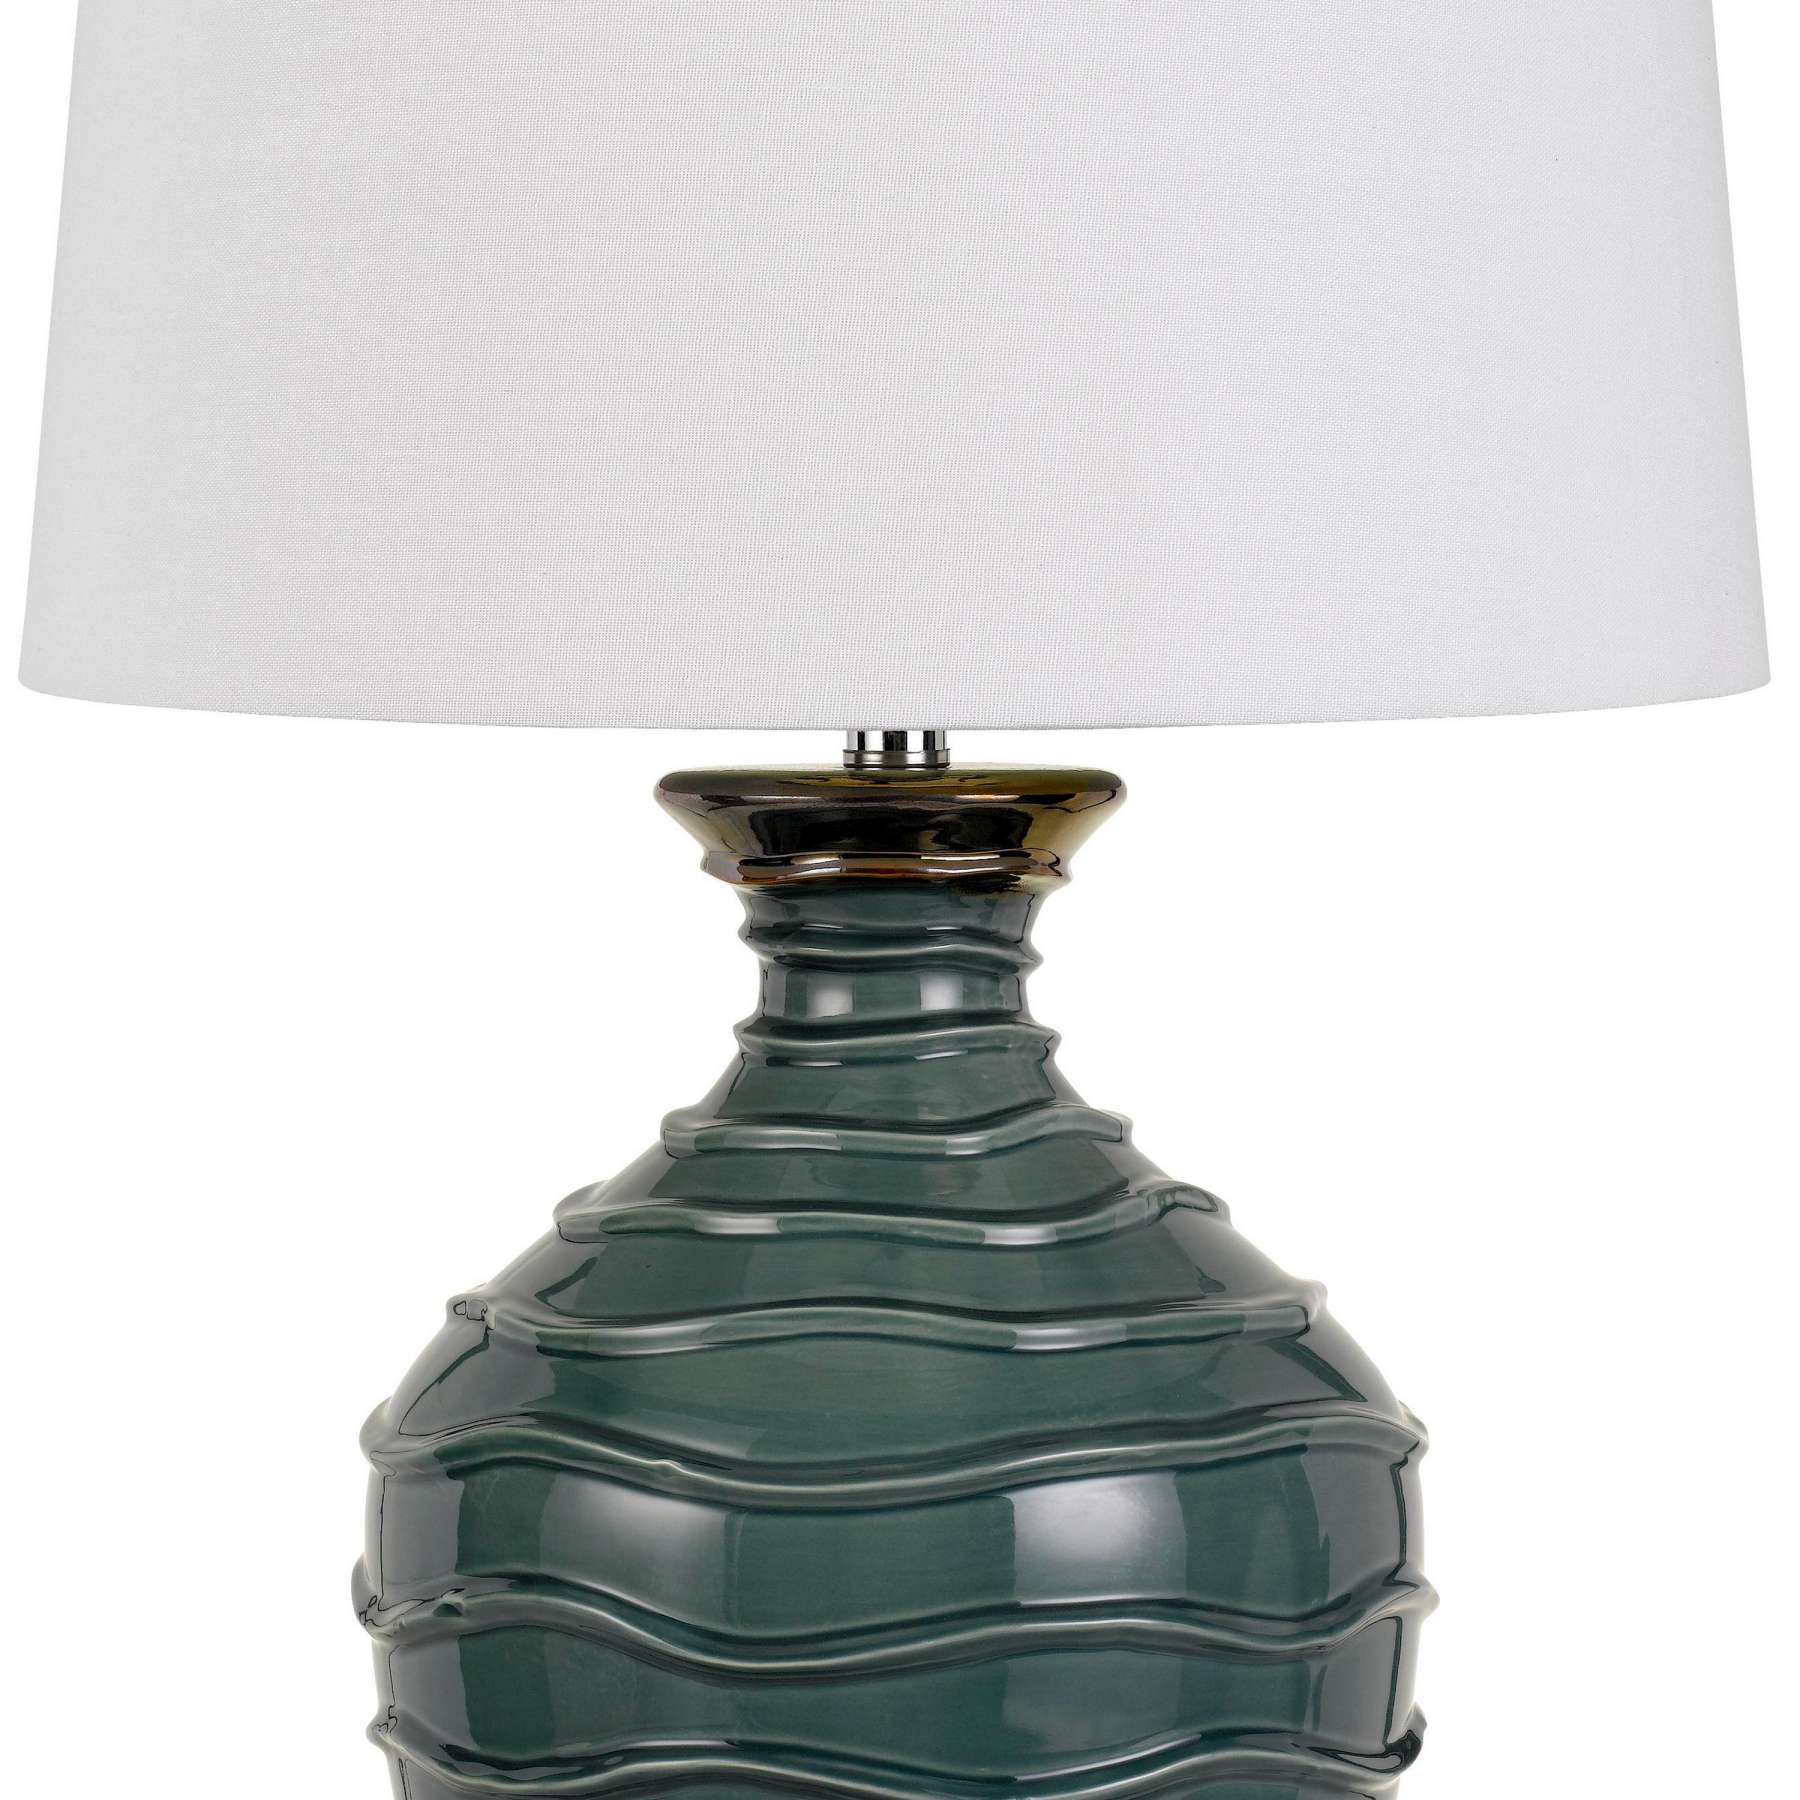 Benzara 150 Watt Ceramic Frame Table Lamp With Drum Shade, White And Green By Benzara Table Lamps BM224804